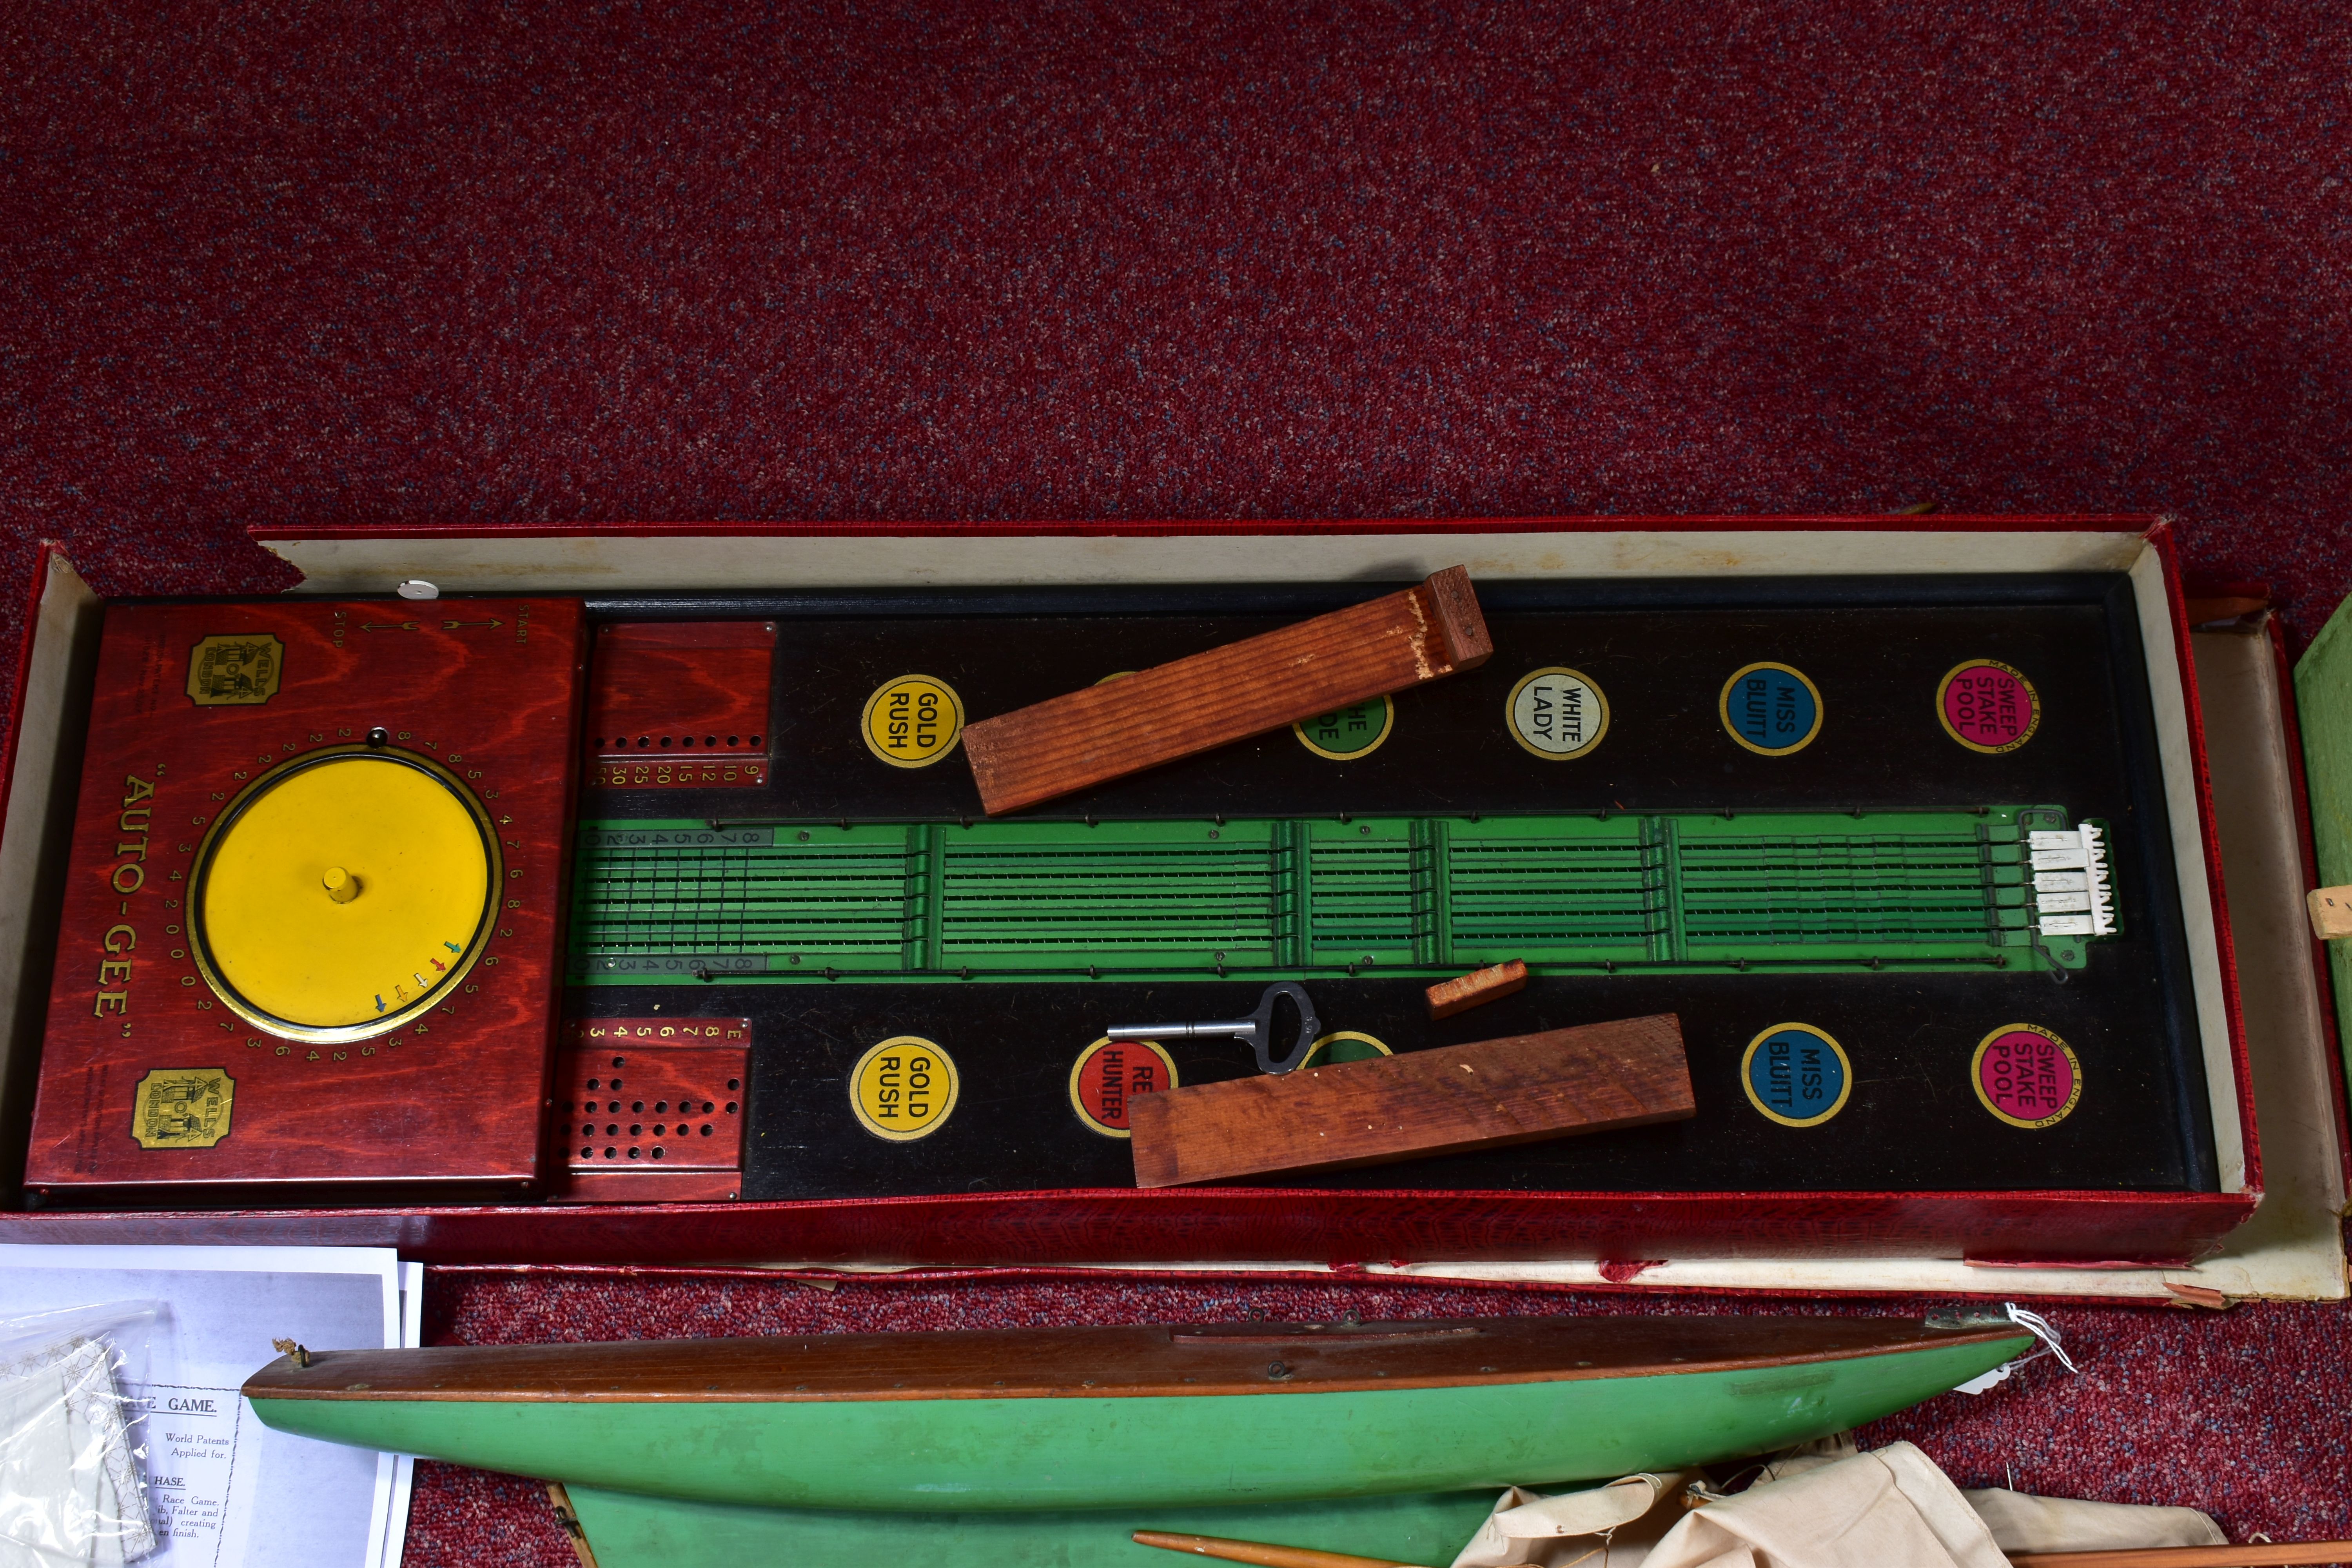 A BOXED WELLS AUTO-GEE HORSE RACING GAME, c.1927, not tested, missing one horse and two pegs, but - Image 5 of 6